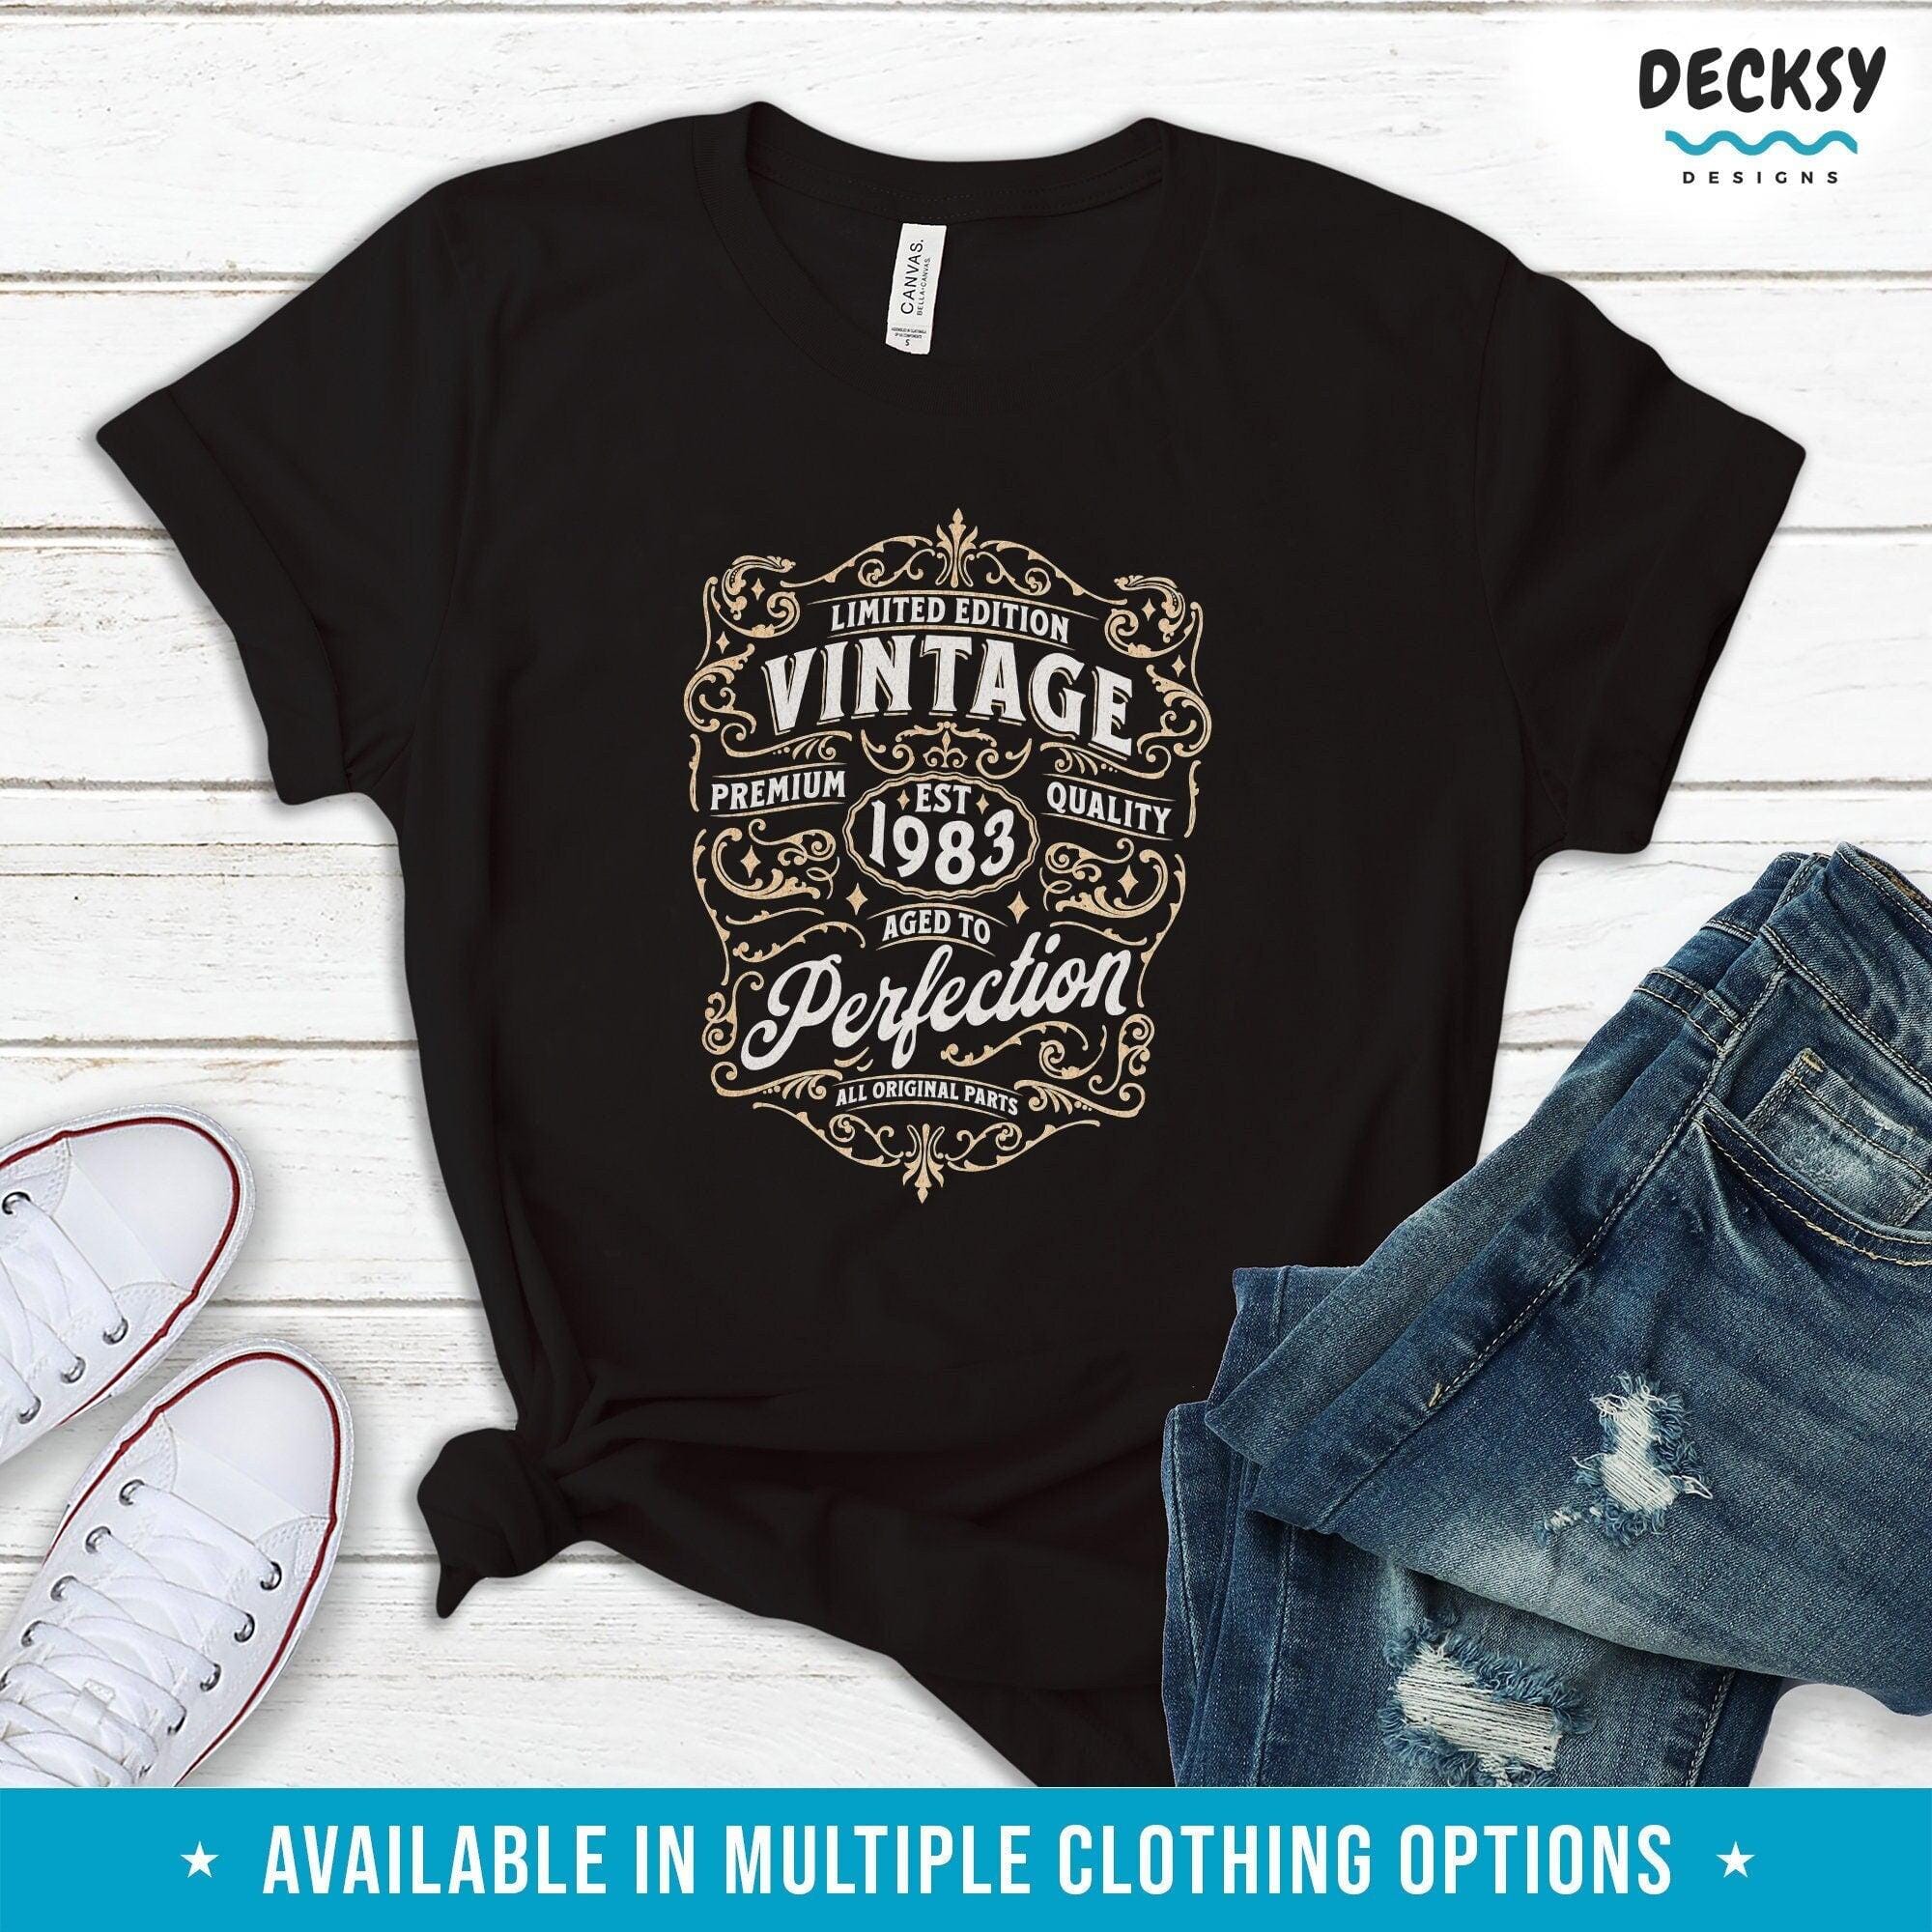 40th Birthday Shirt, Born In 1983 Gift, Vintage Retro Style 1983 Tee-Clothing:Gender-Neutral Adult Clothing:Tops & Tees:T-shirts:Graphic Tees-DecksyDesigns